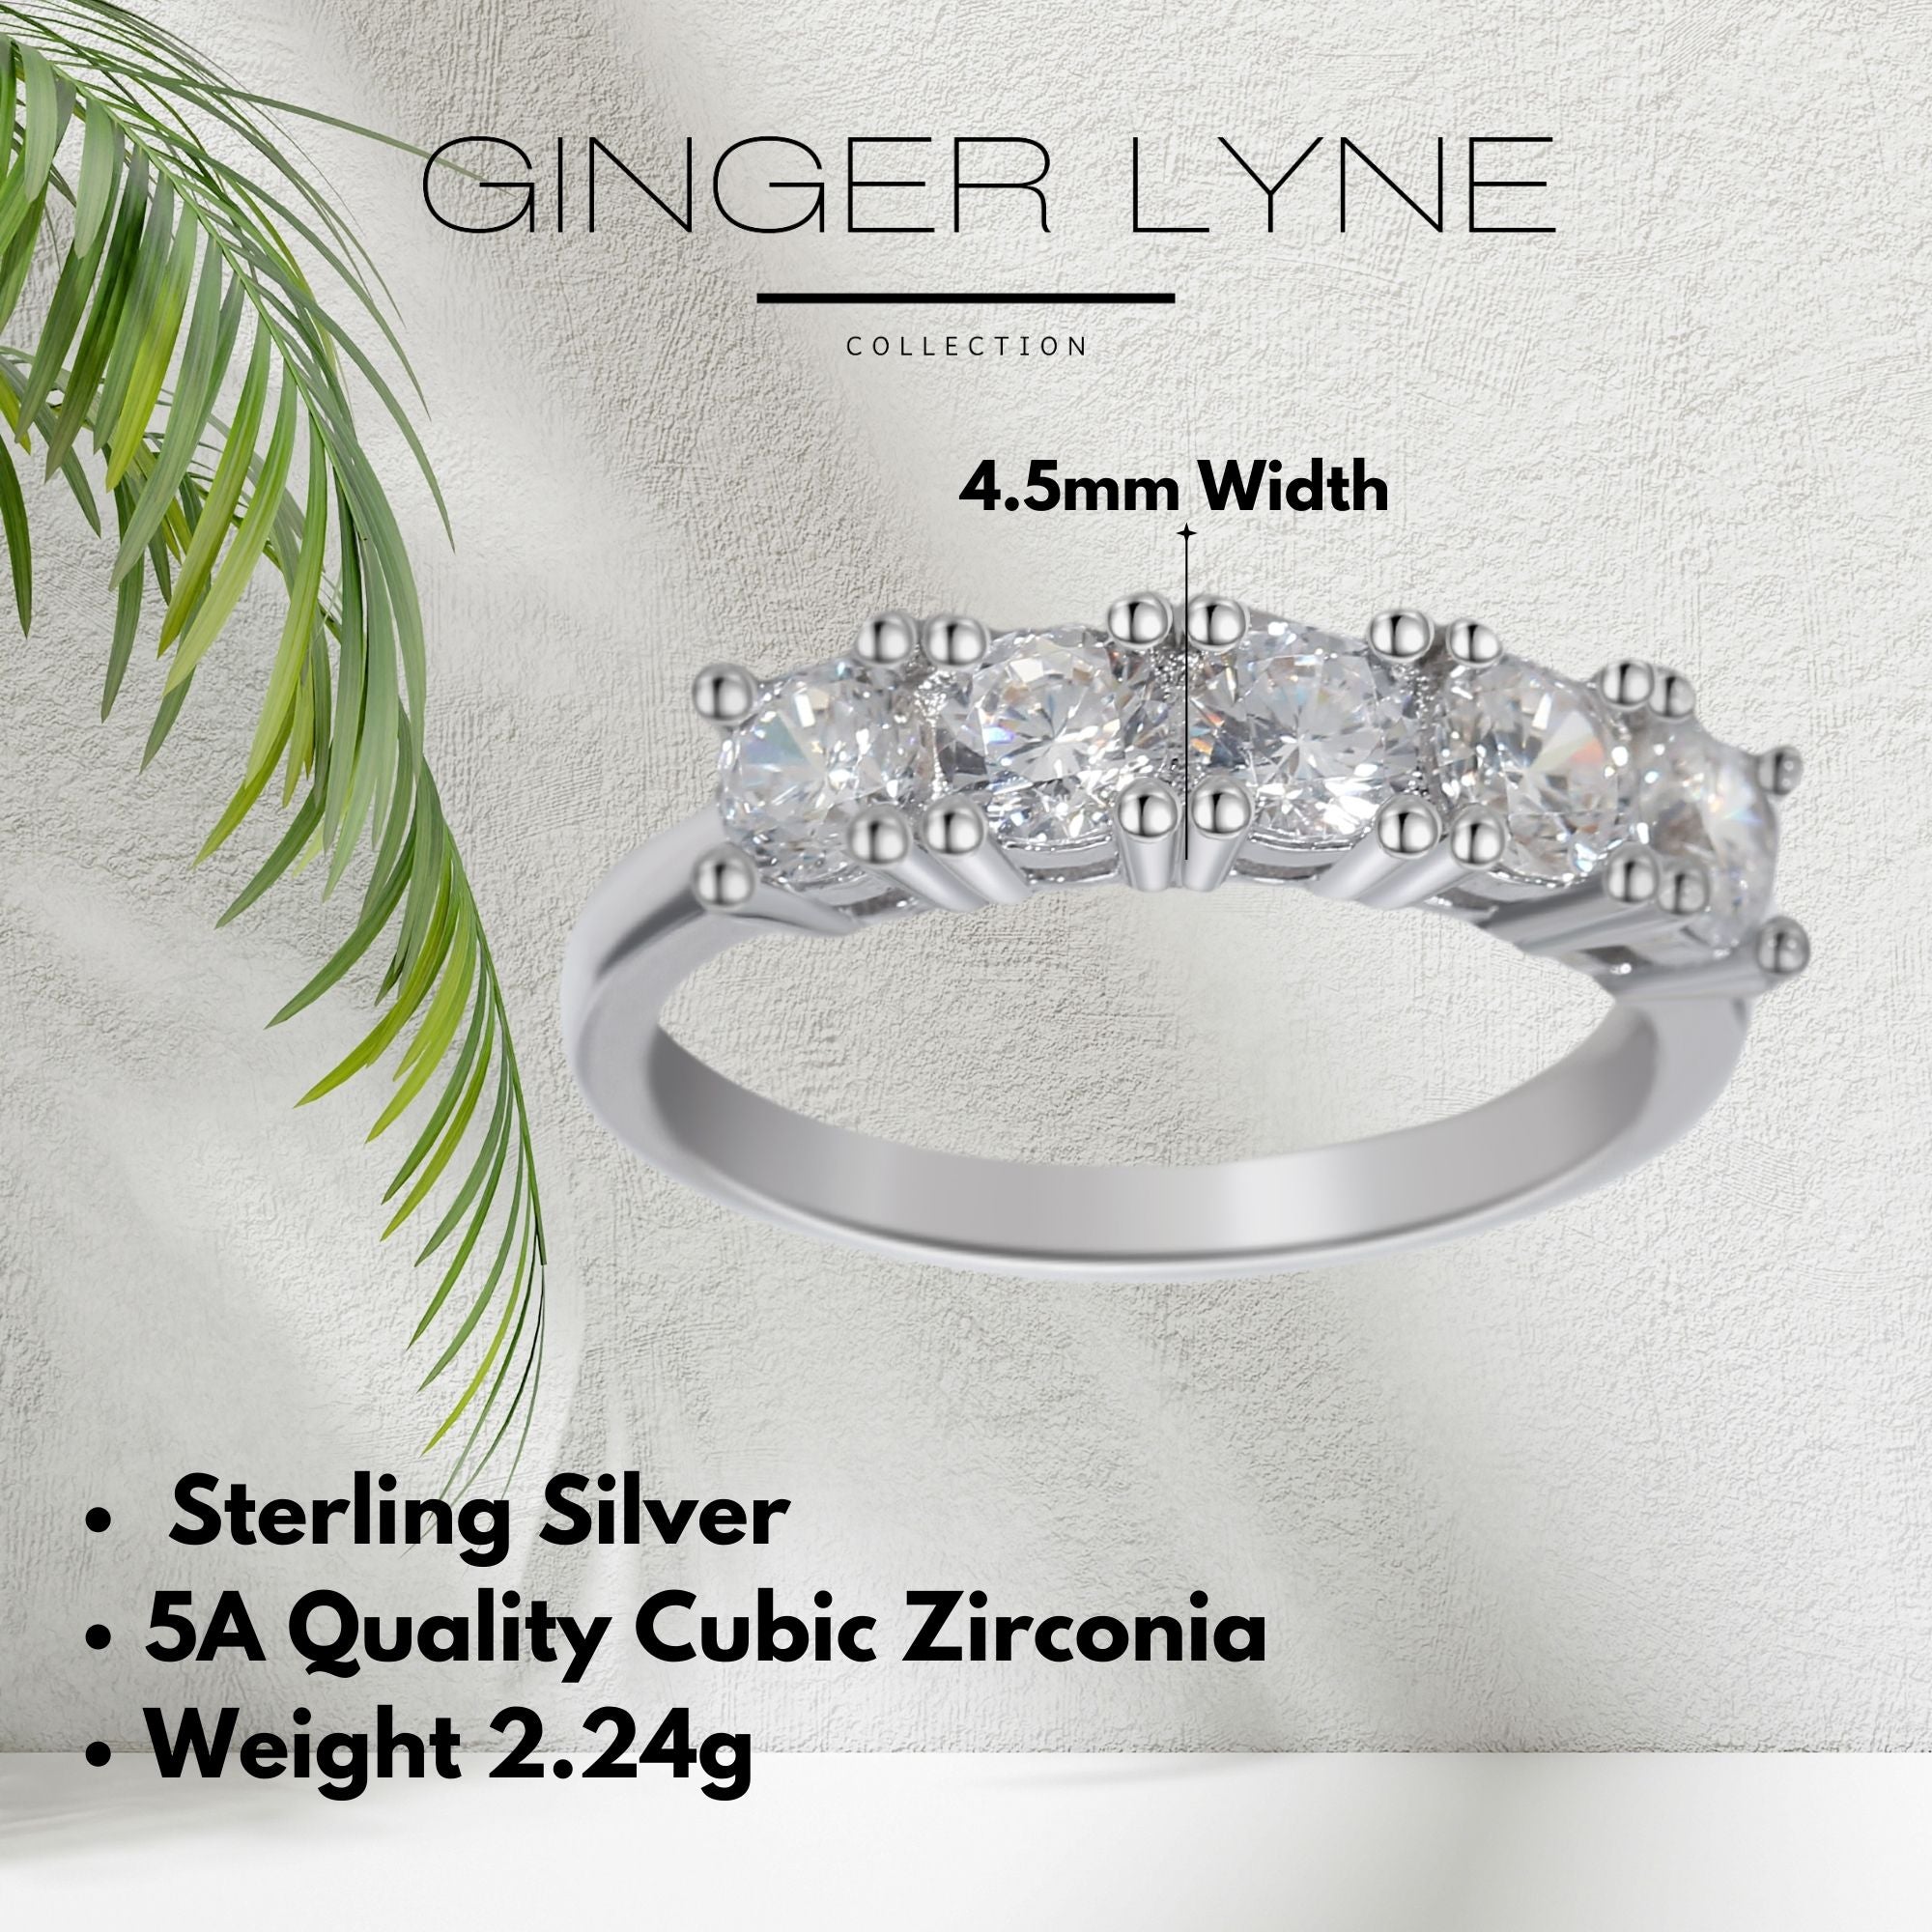 Le Bella Anniversary Ring for Women Wedding Band Ring Cz Sterling Silver by Ginger Lyne - 10